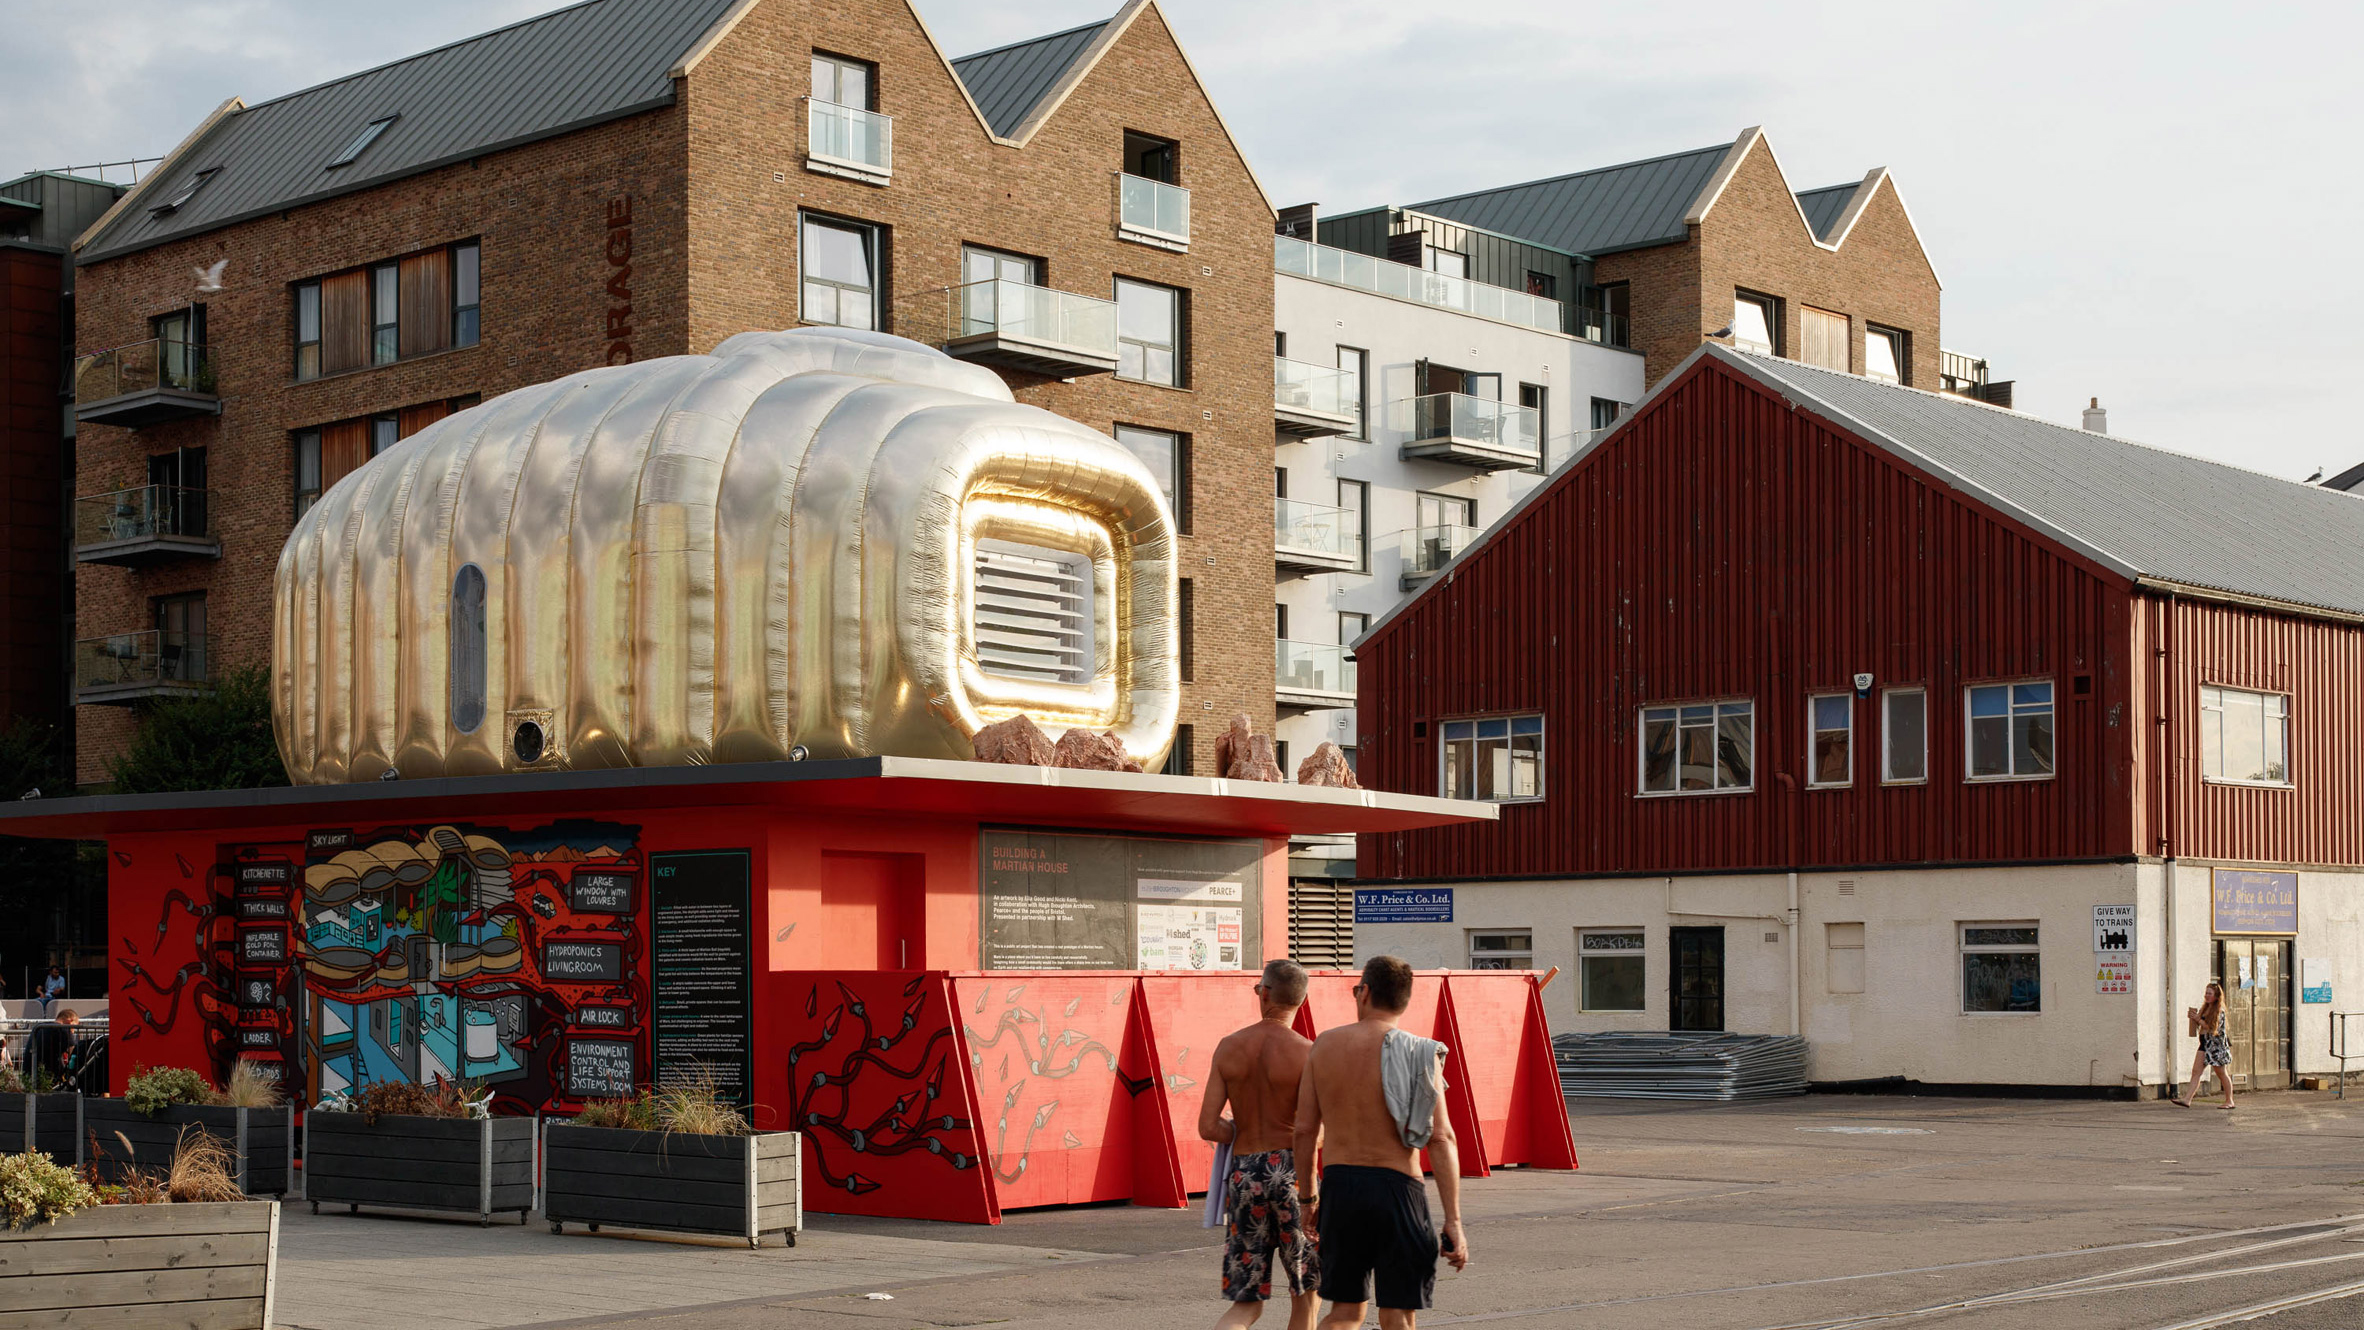 Inflatable Martian House at M Shed in Bristol